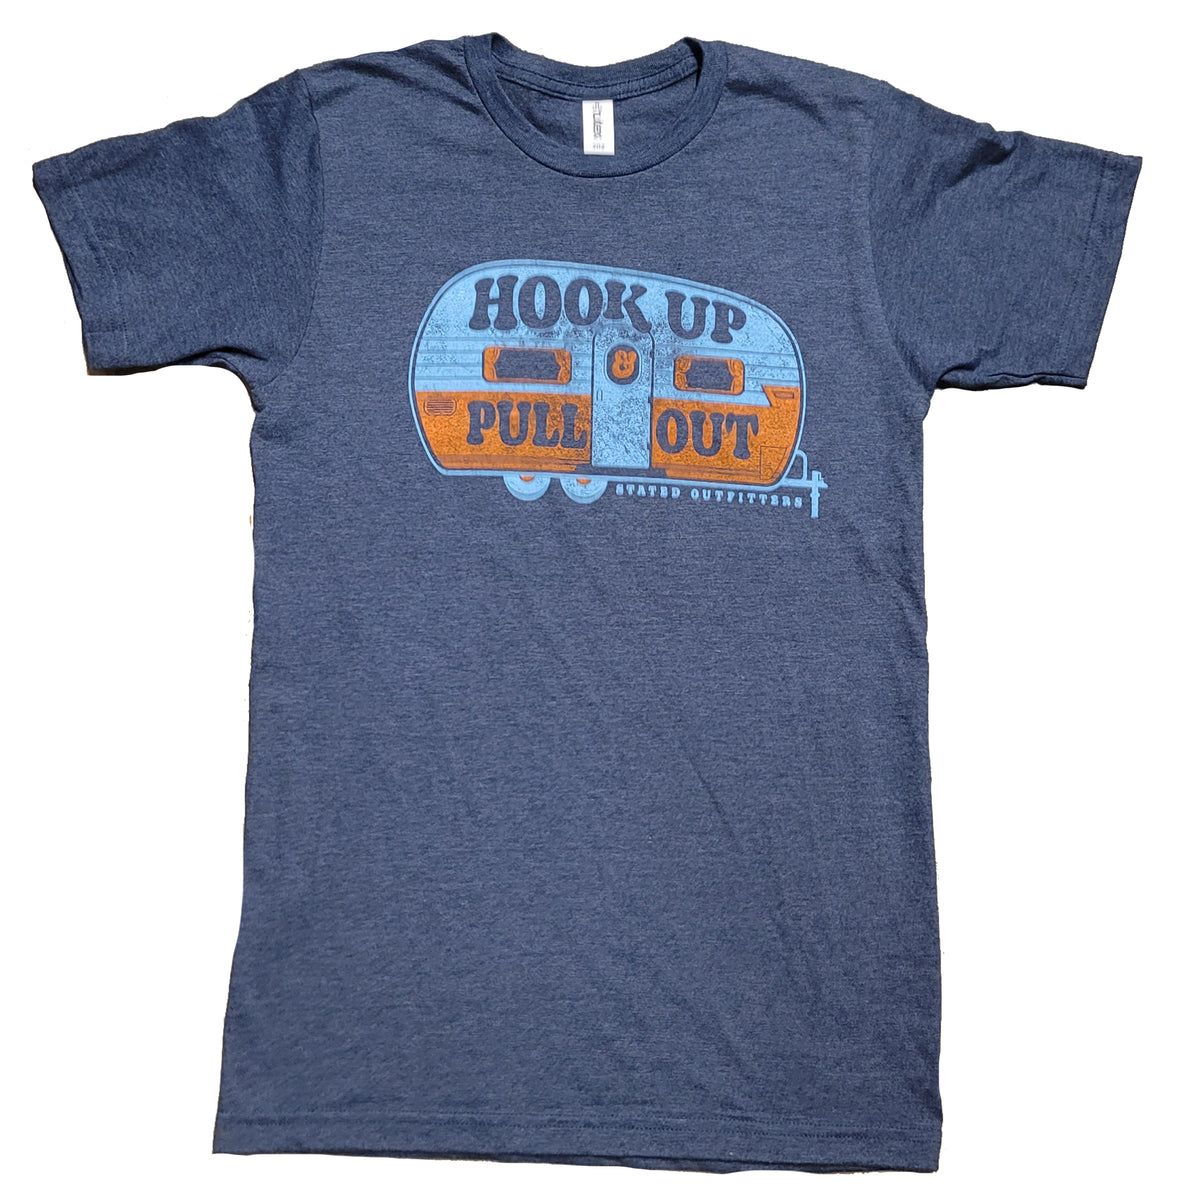 Stated Outfitters Hook Up & Pull Out Tee